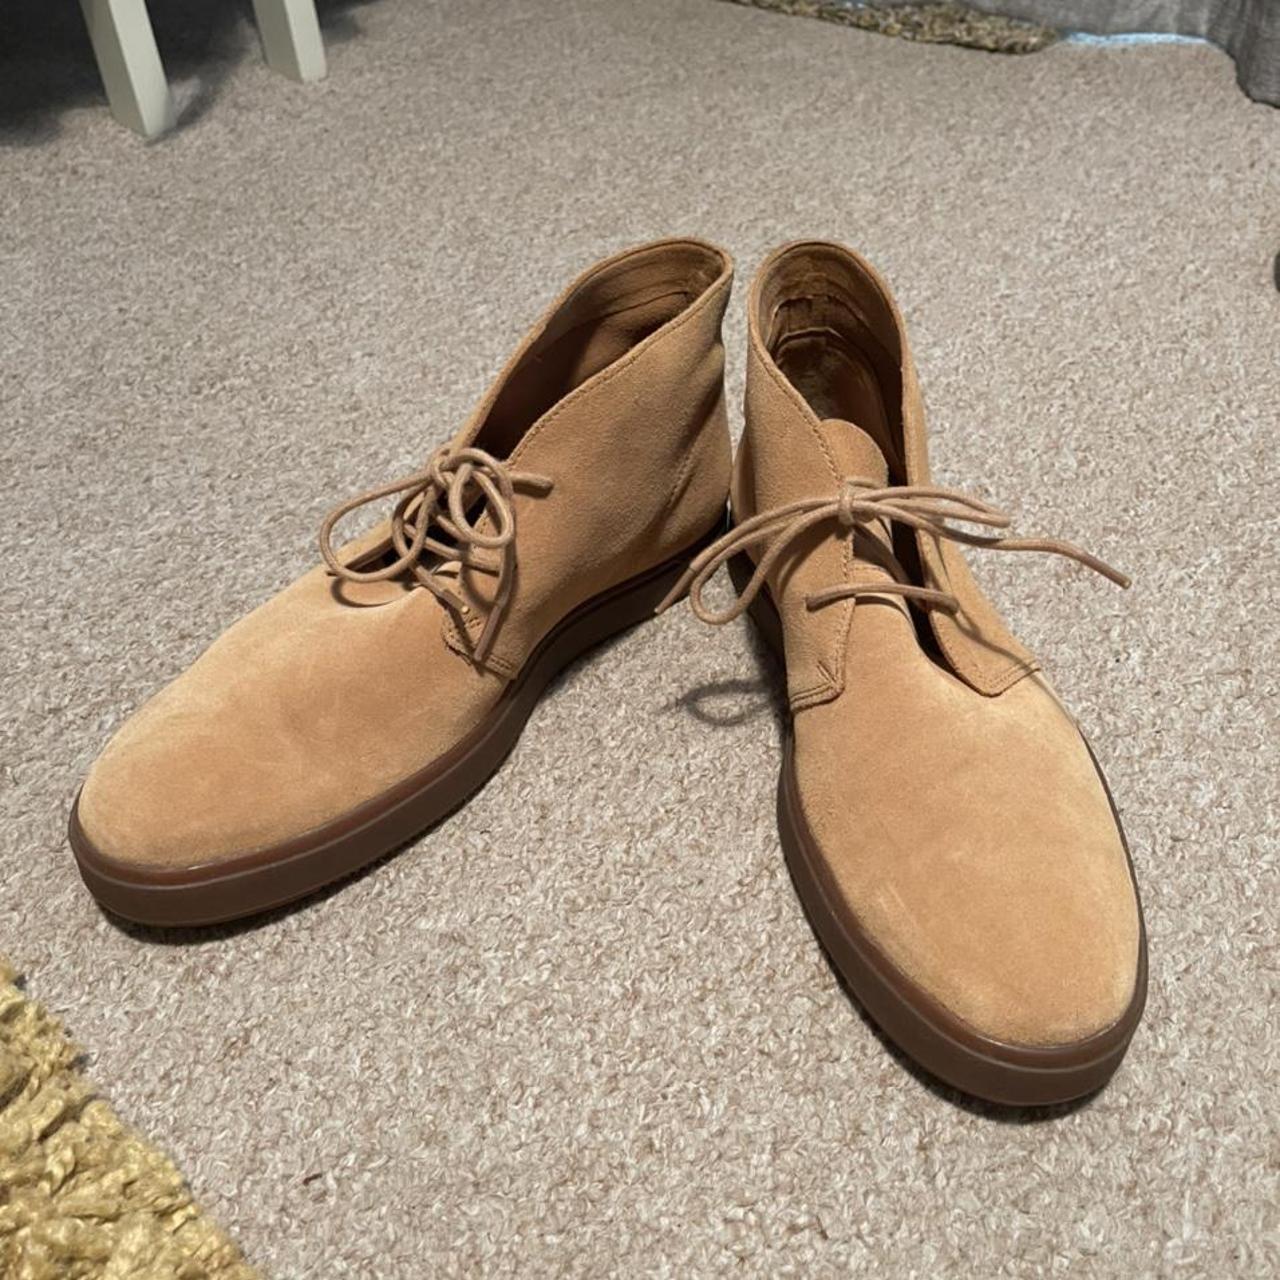 Product Image 3 - Clarks men’s suede boots

Worn once